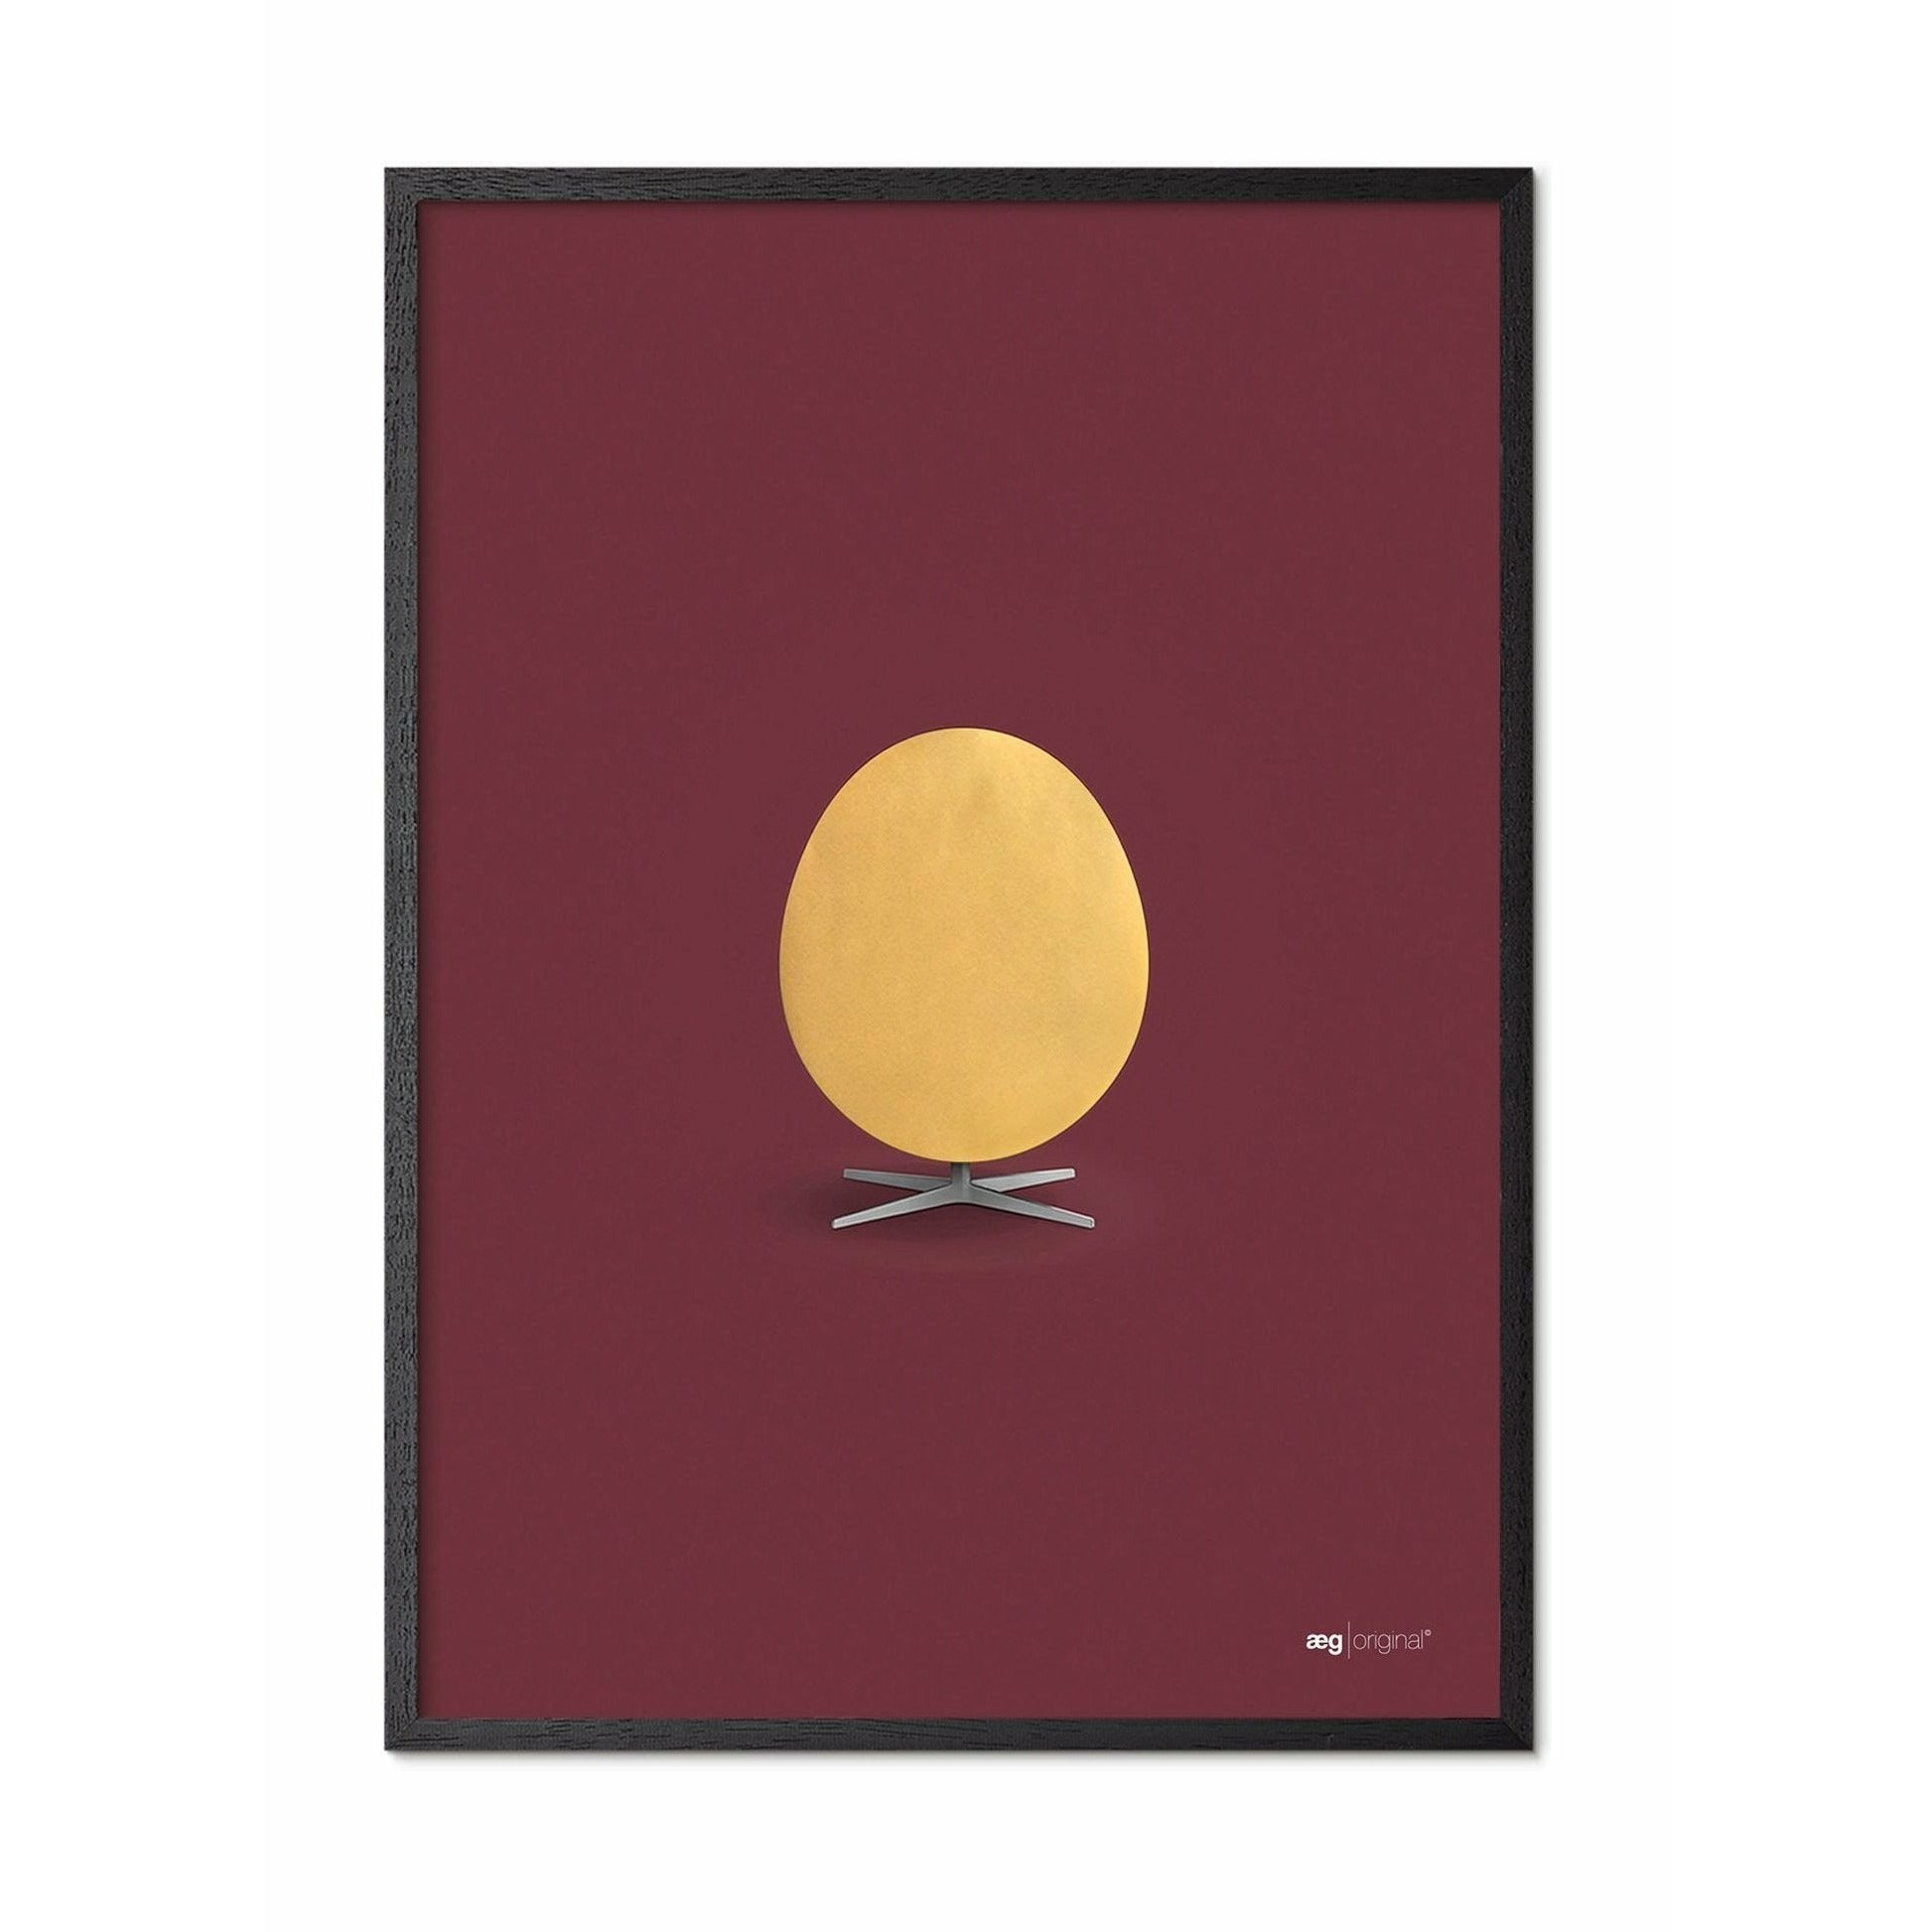 Brainchild Egg Poster, Frame In Black Lacquered Wood A5, Gold/Bordeaux Background